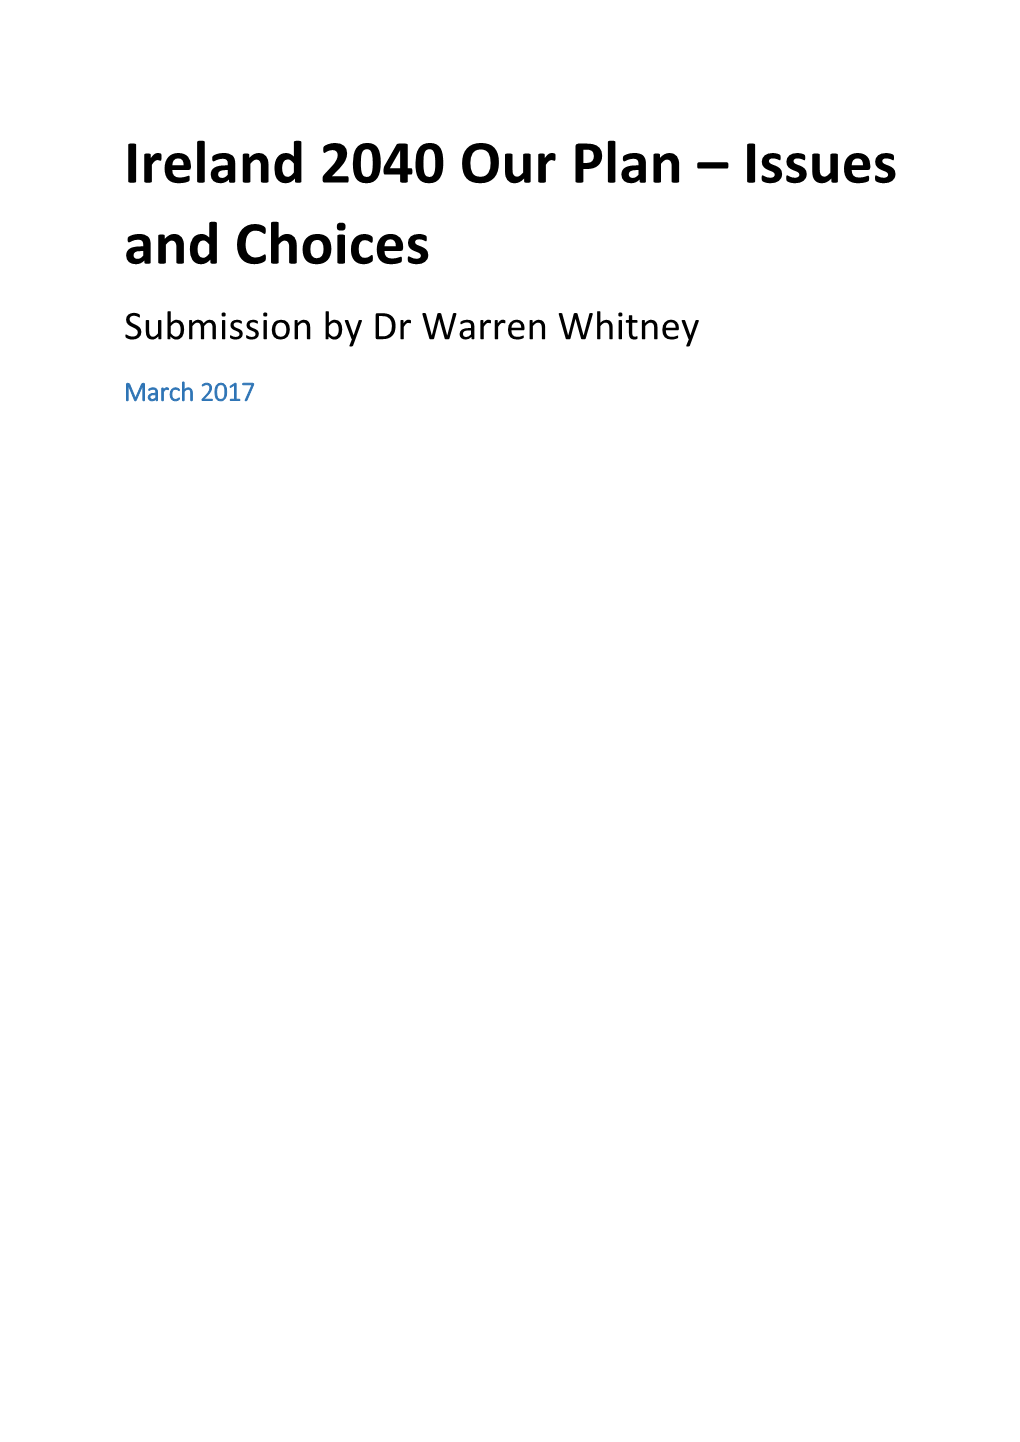 Ireland 2040 Our Plan – Issues and Choices Submission by Dr Warren Whitney